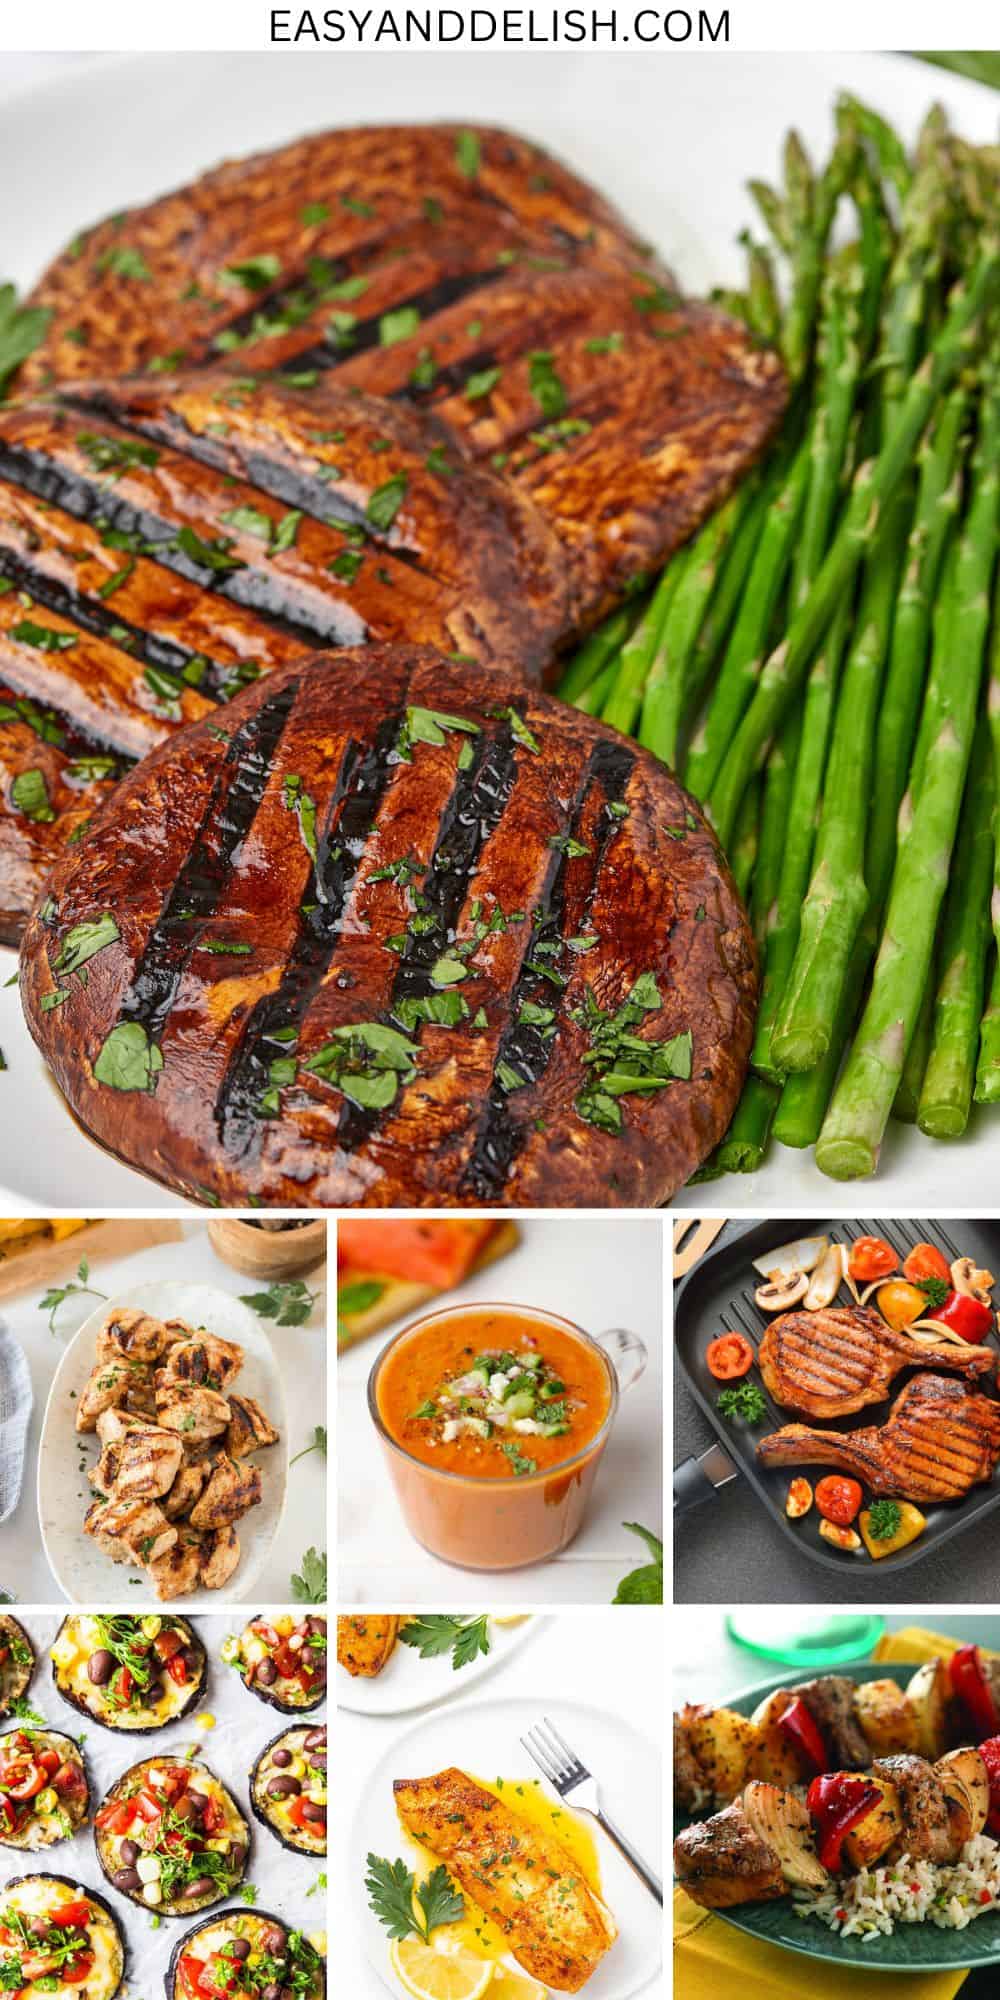 Collage showing seven out of 21 images of supper recipes for hot days, including a cold soup, grilled pork chops, grilled mushroom steak, pan-seared halibut, grilled chicken nuggets, and pork kabobs.   